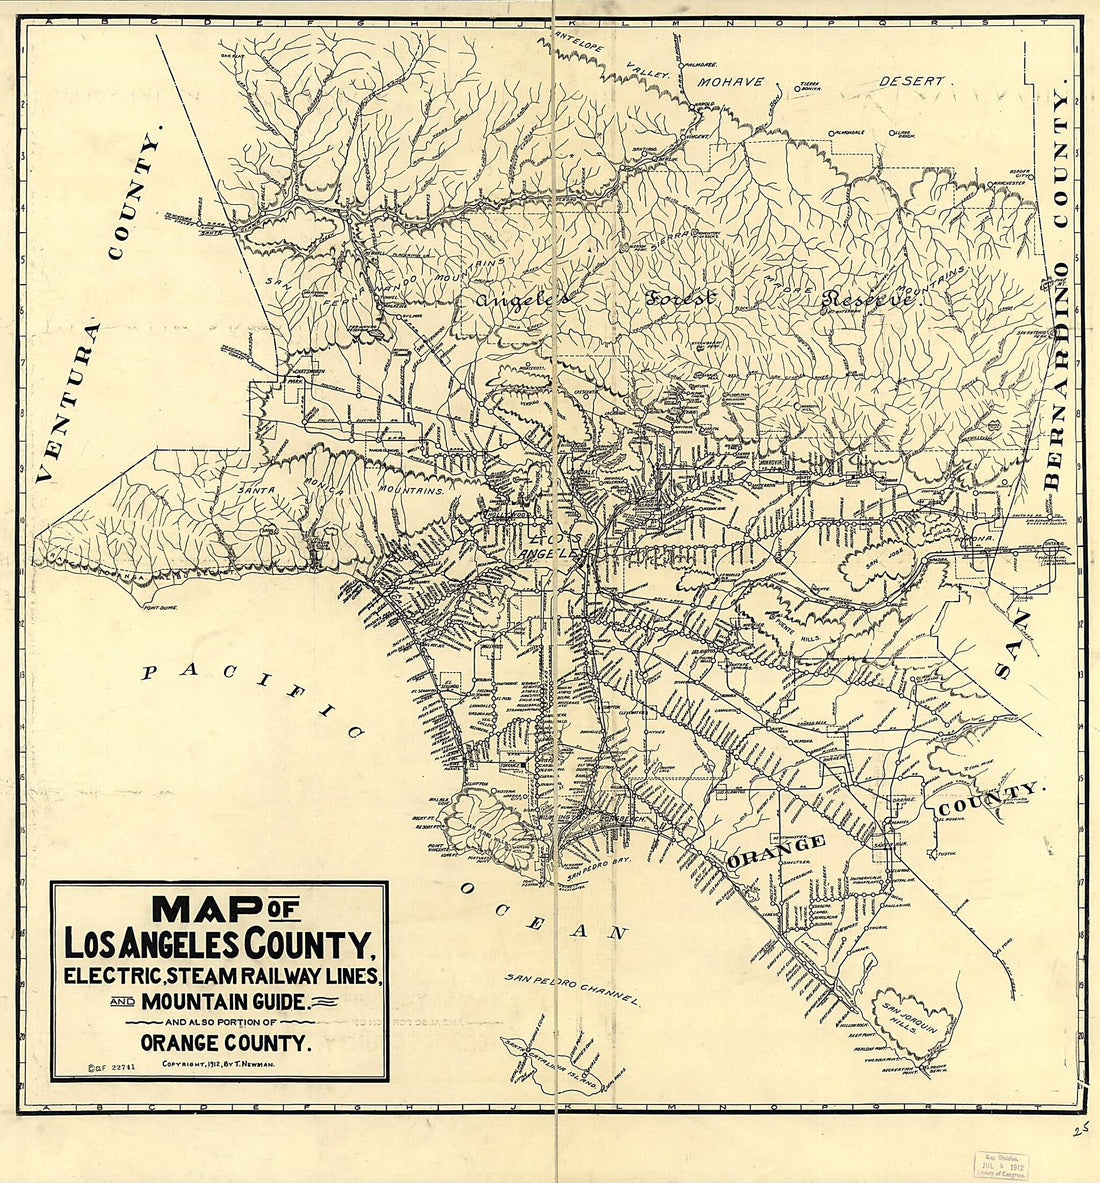 This old map of Map of Los Angeles County : Electric, Steam Railway Lines, and Mountain Guide and Also Portion of Orange County from 1912 was created by T. Newman in 1912